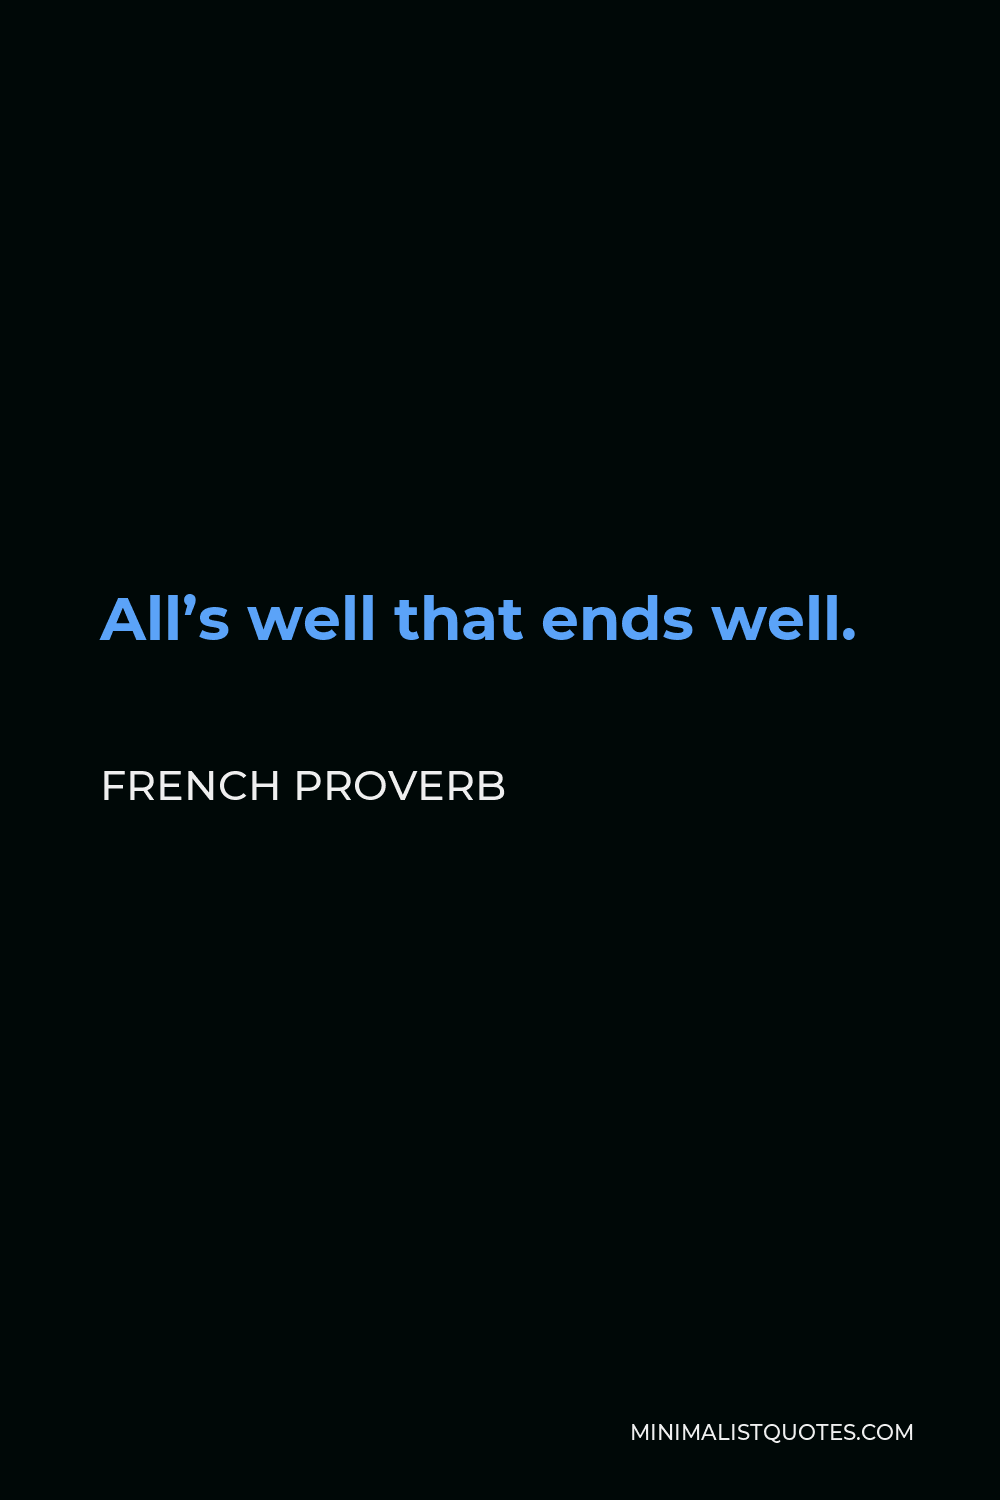 French Proverb Quote - All’s well that ends well.